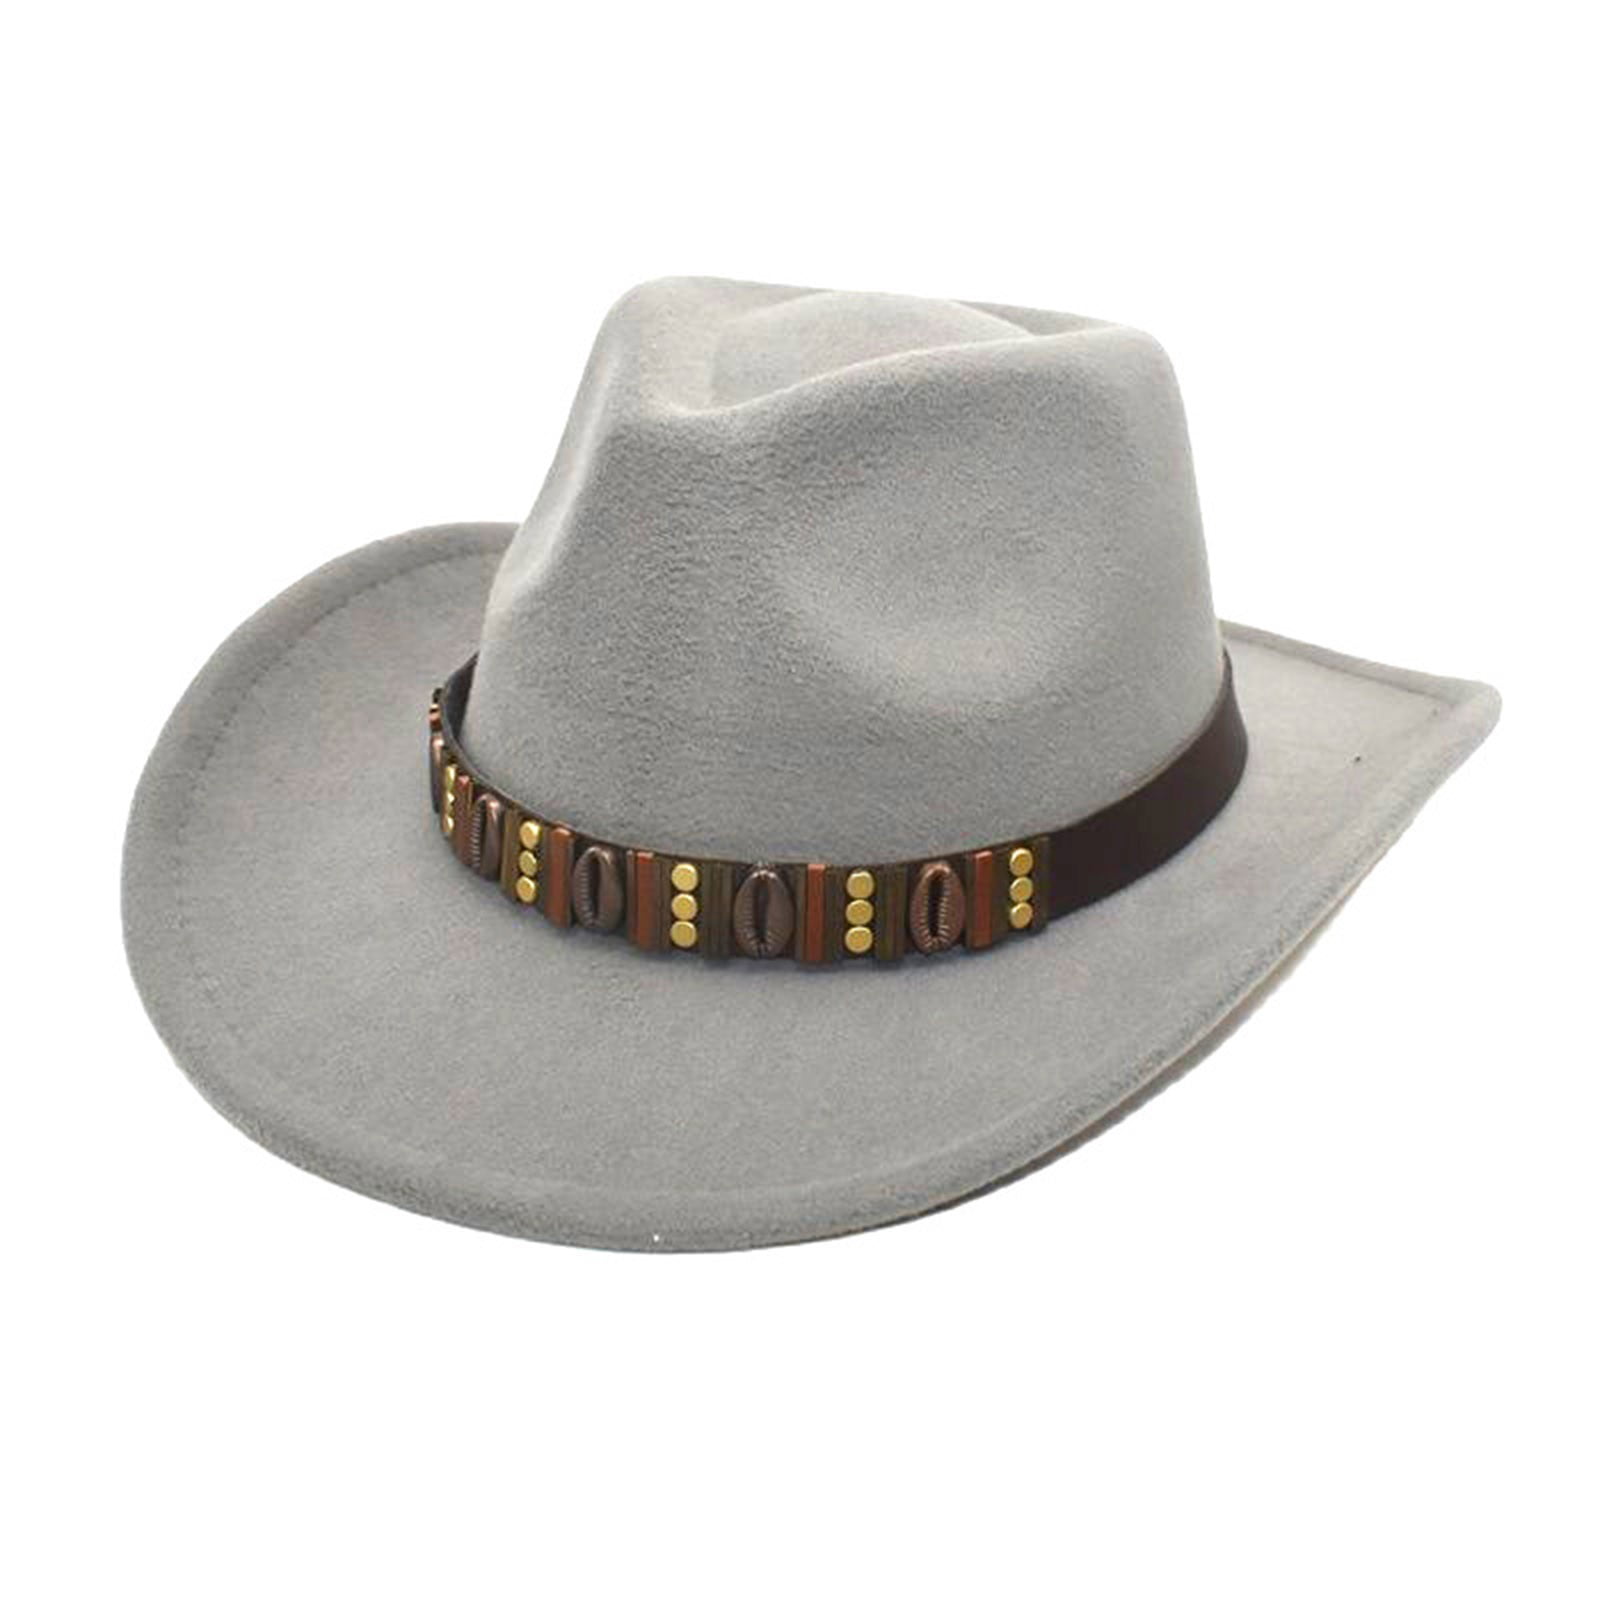 Old Glory Gray Straw Western Hat 2XL Fits 7-7/8 to 8